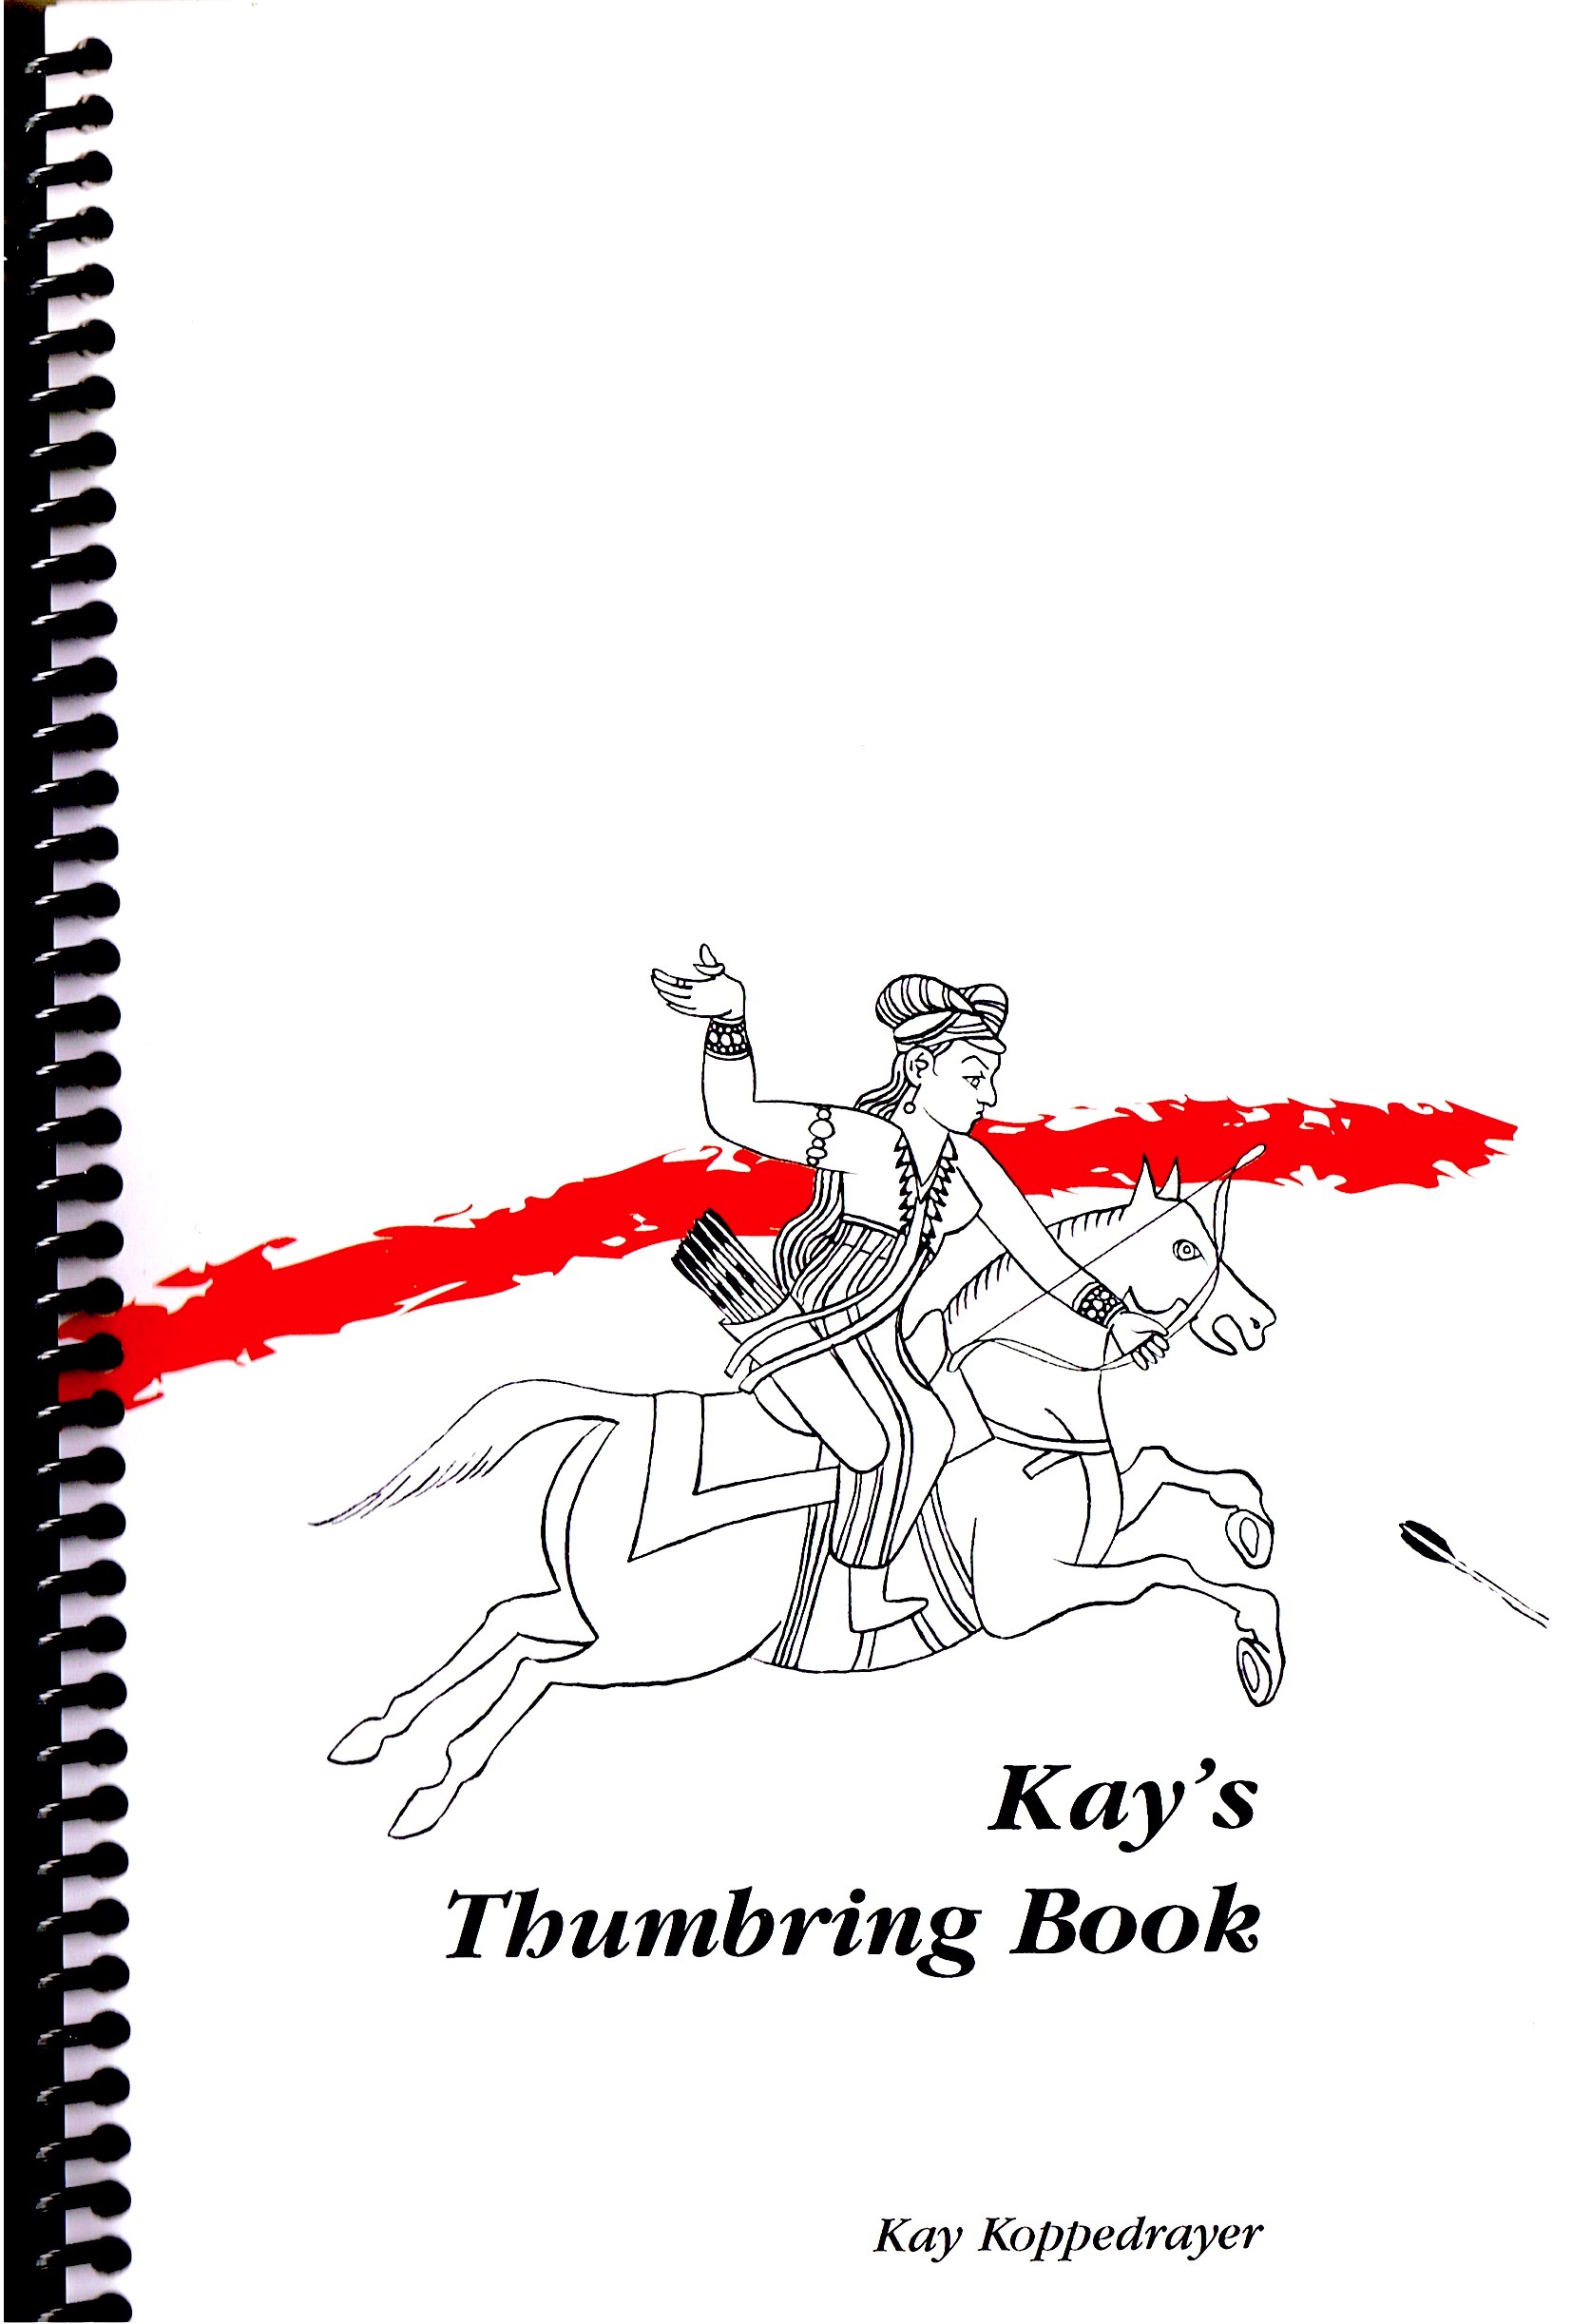 Thumbring book